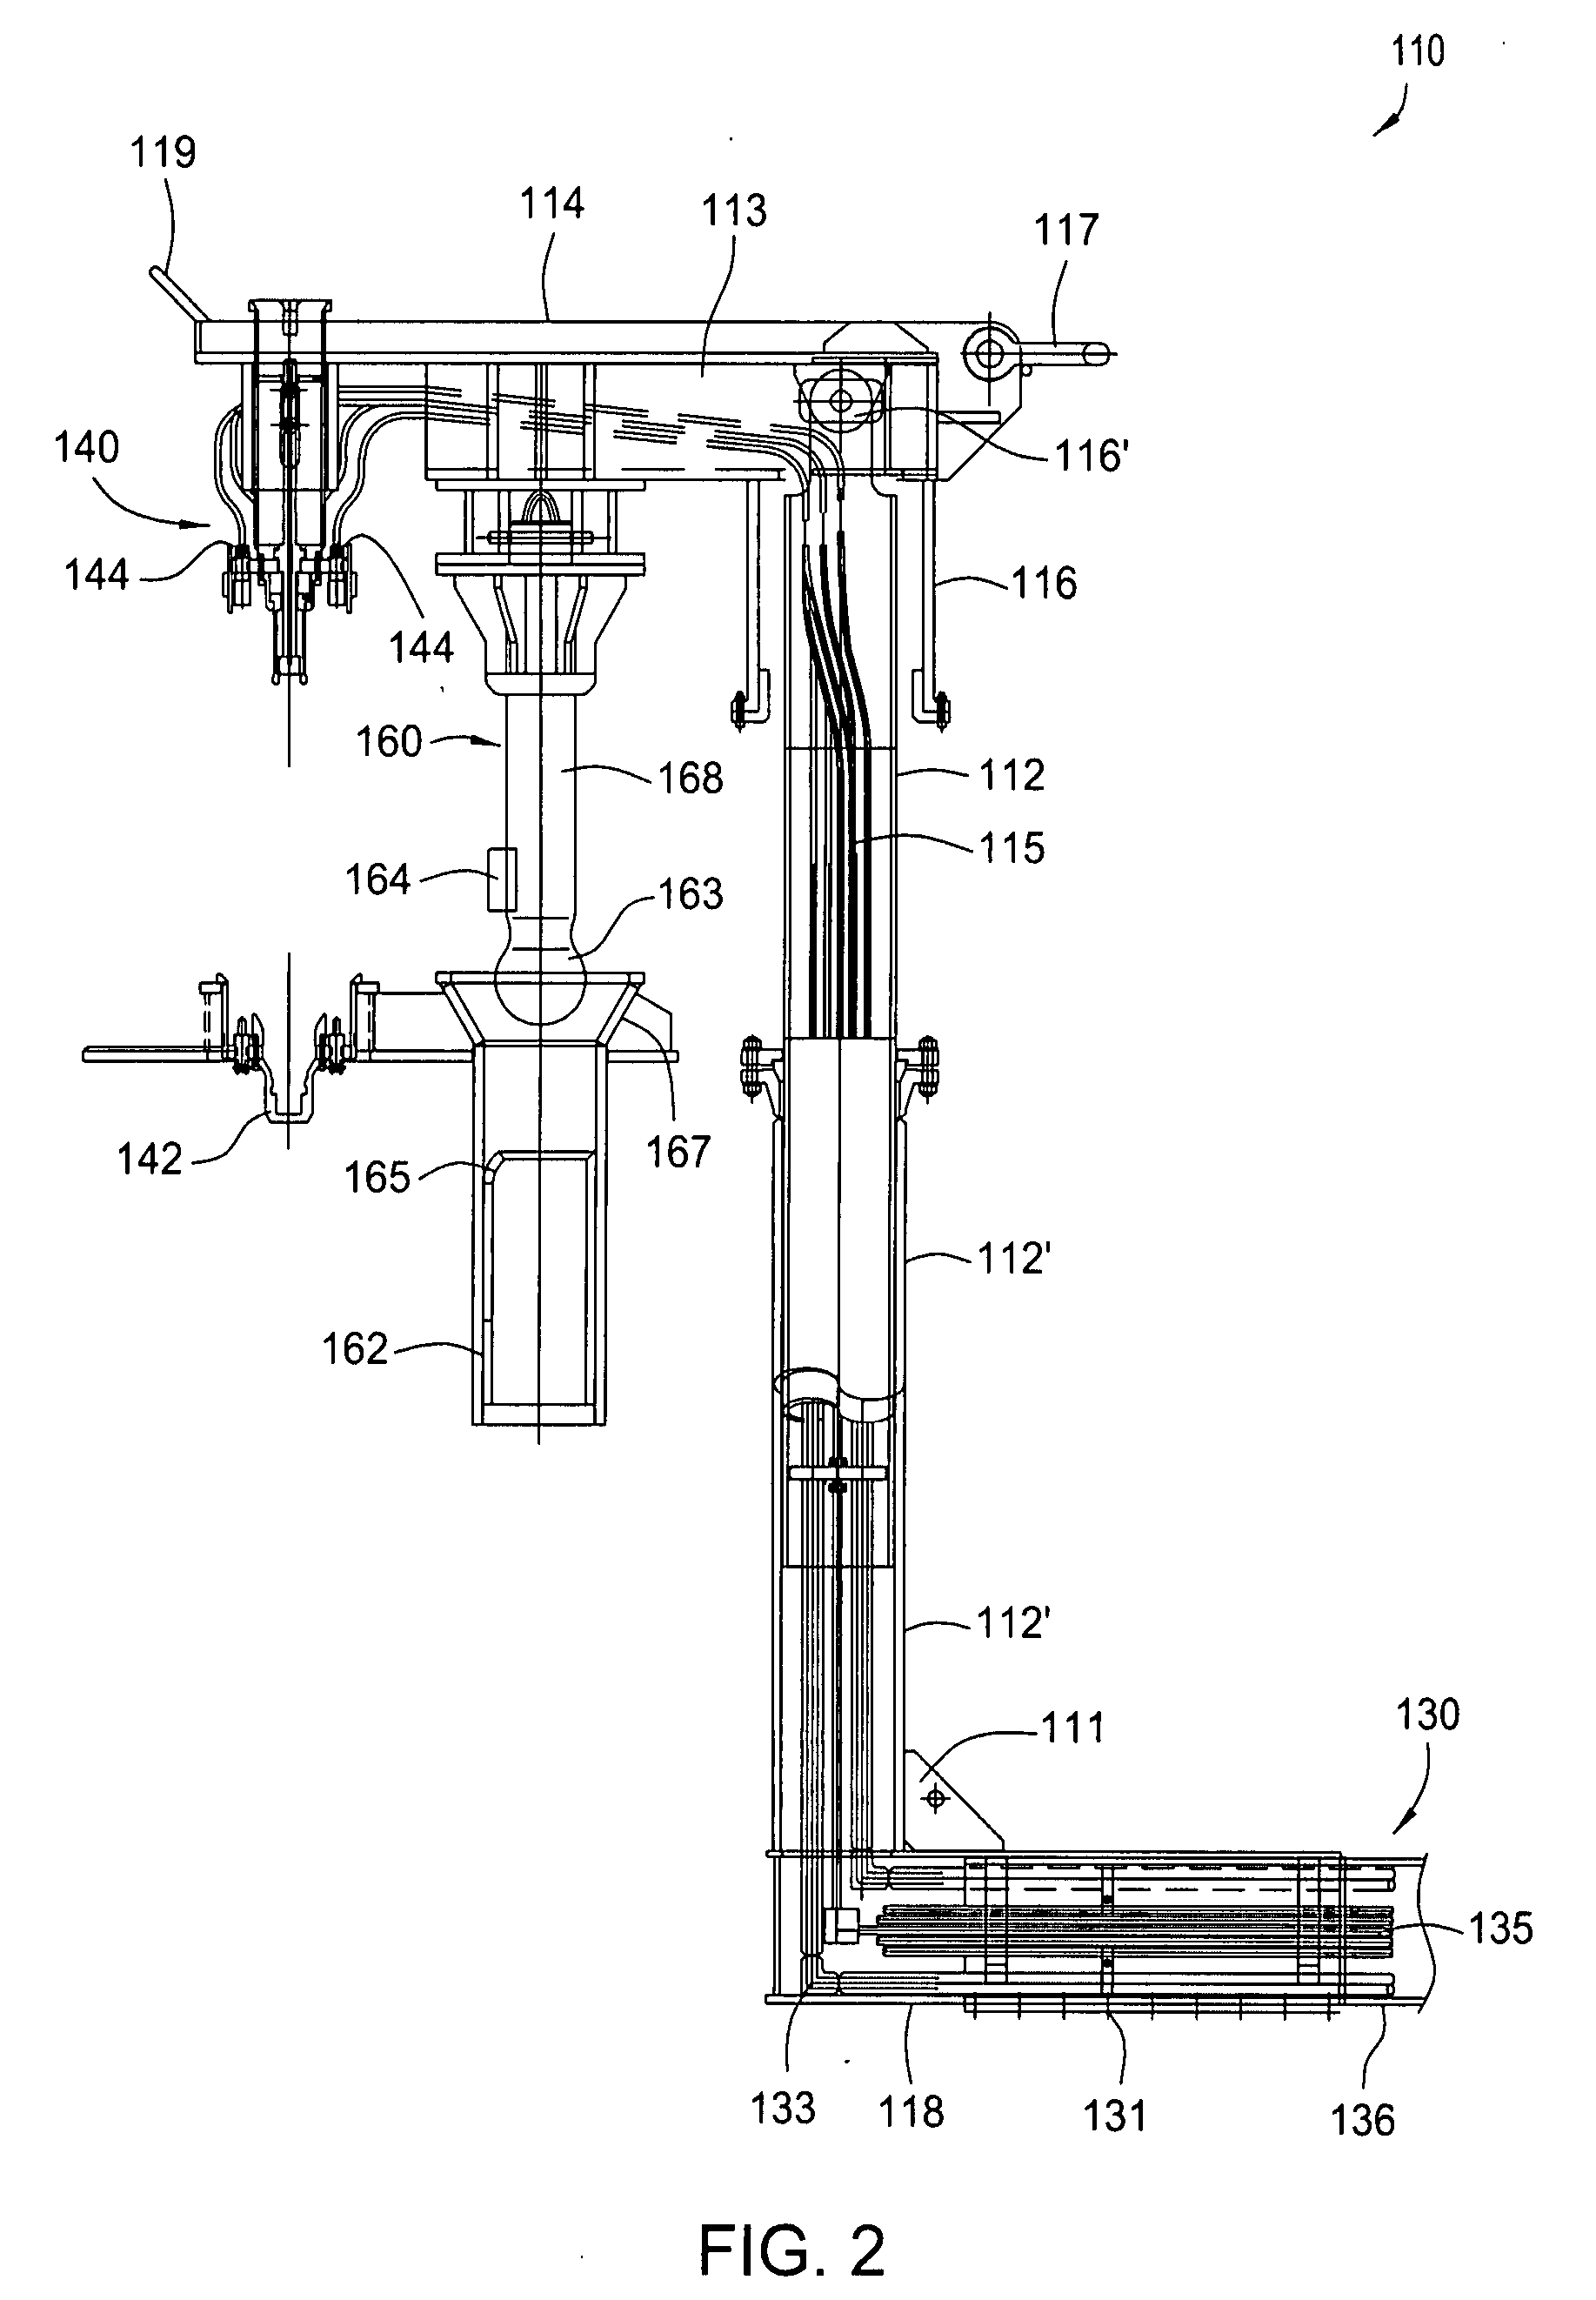 Flying Lead Connector and Method for Making Subsea Connections